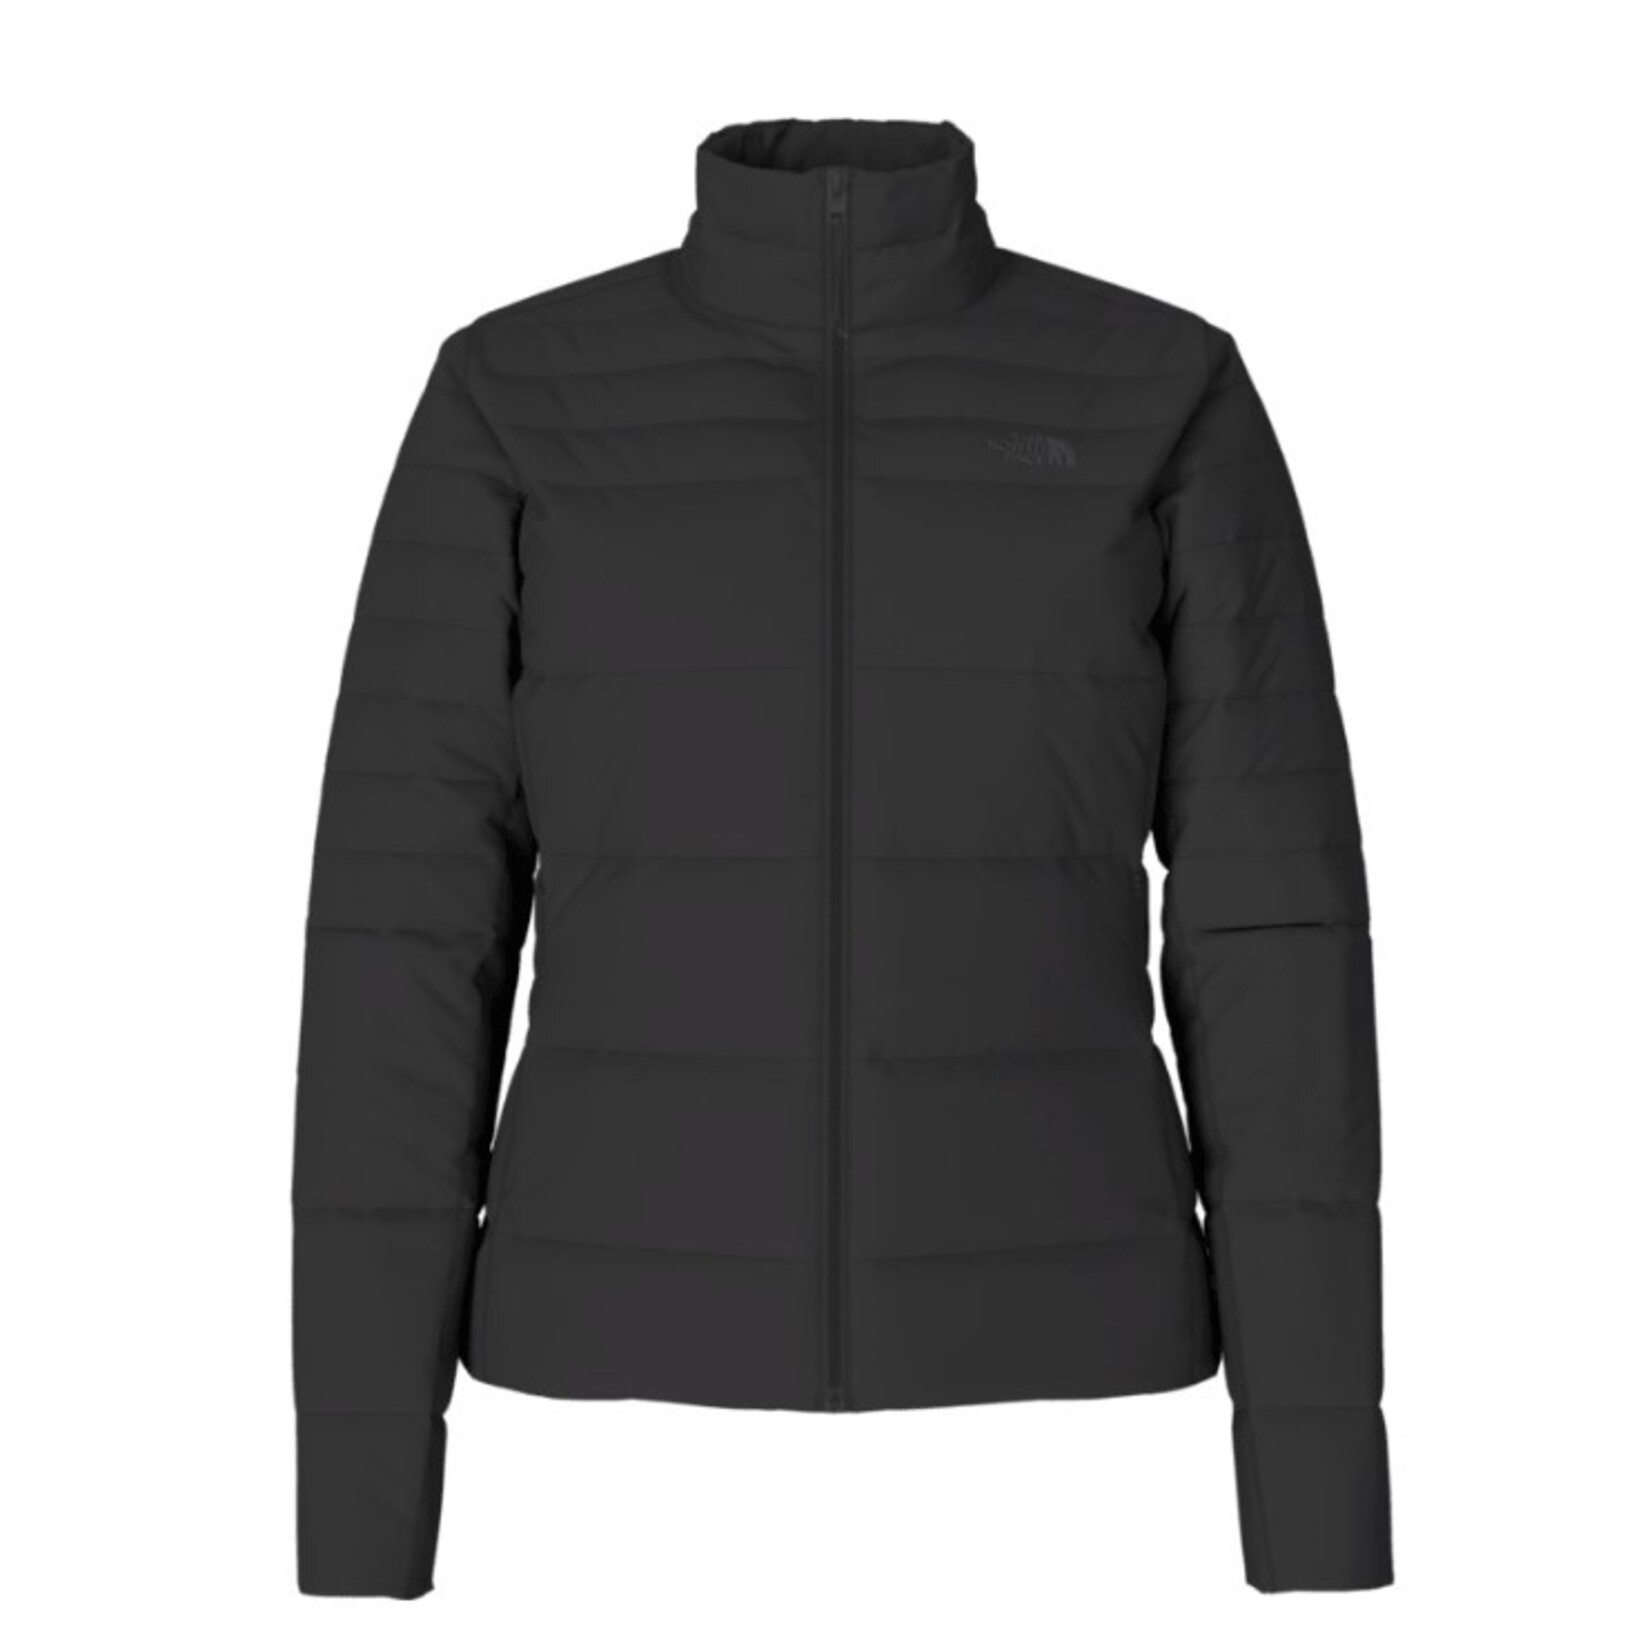 THE NORTH FACE Women's Clementine Triclimate®